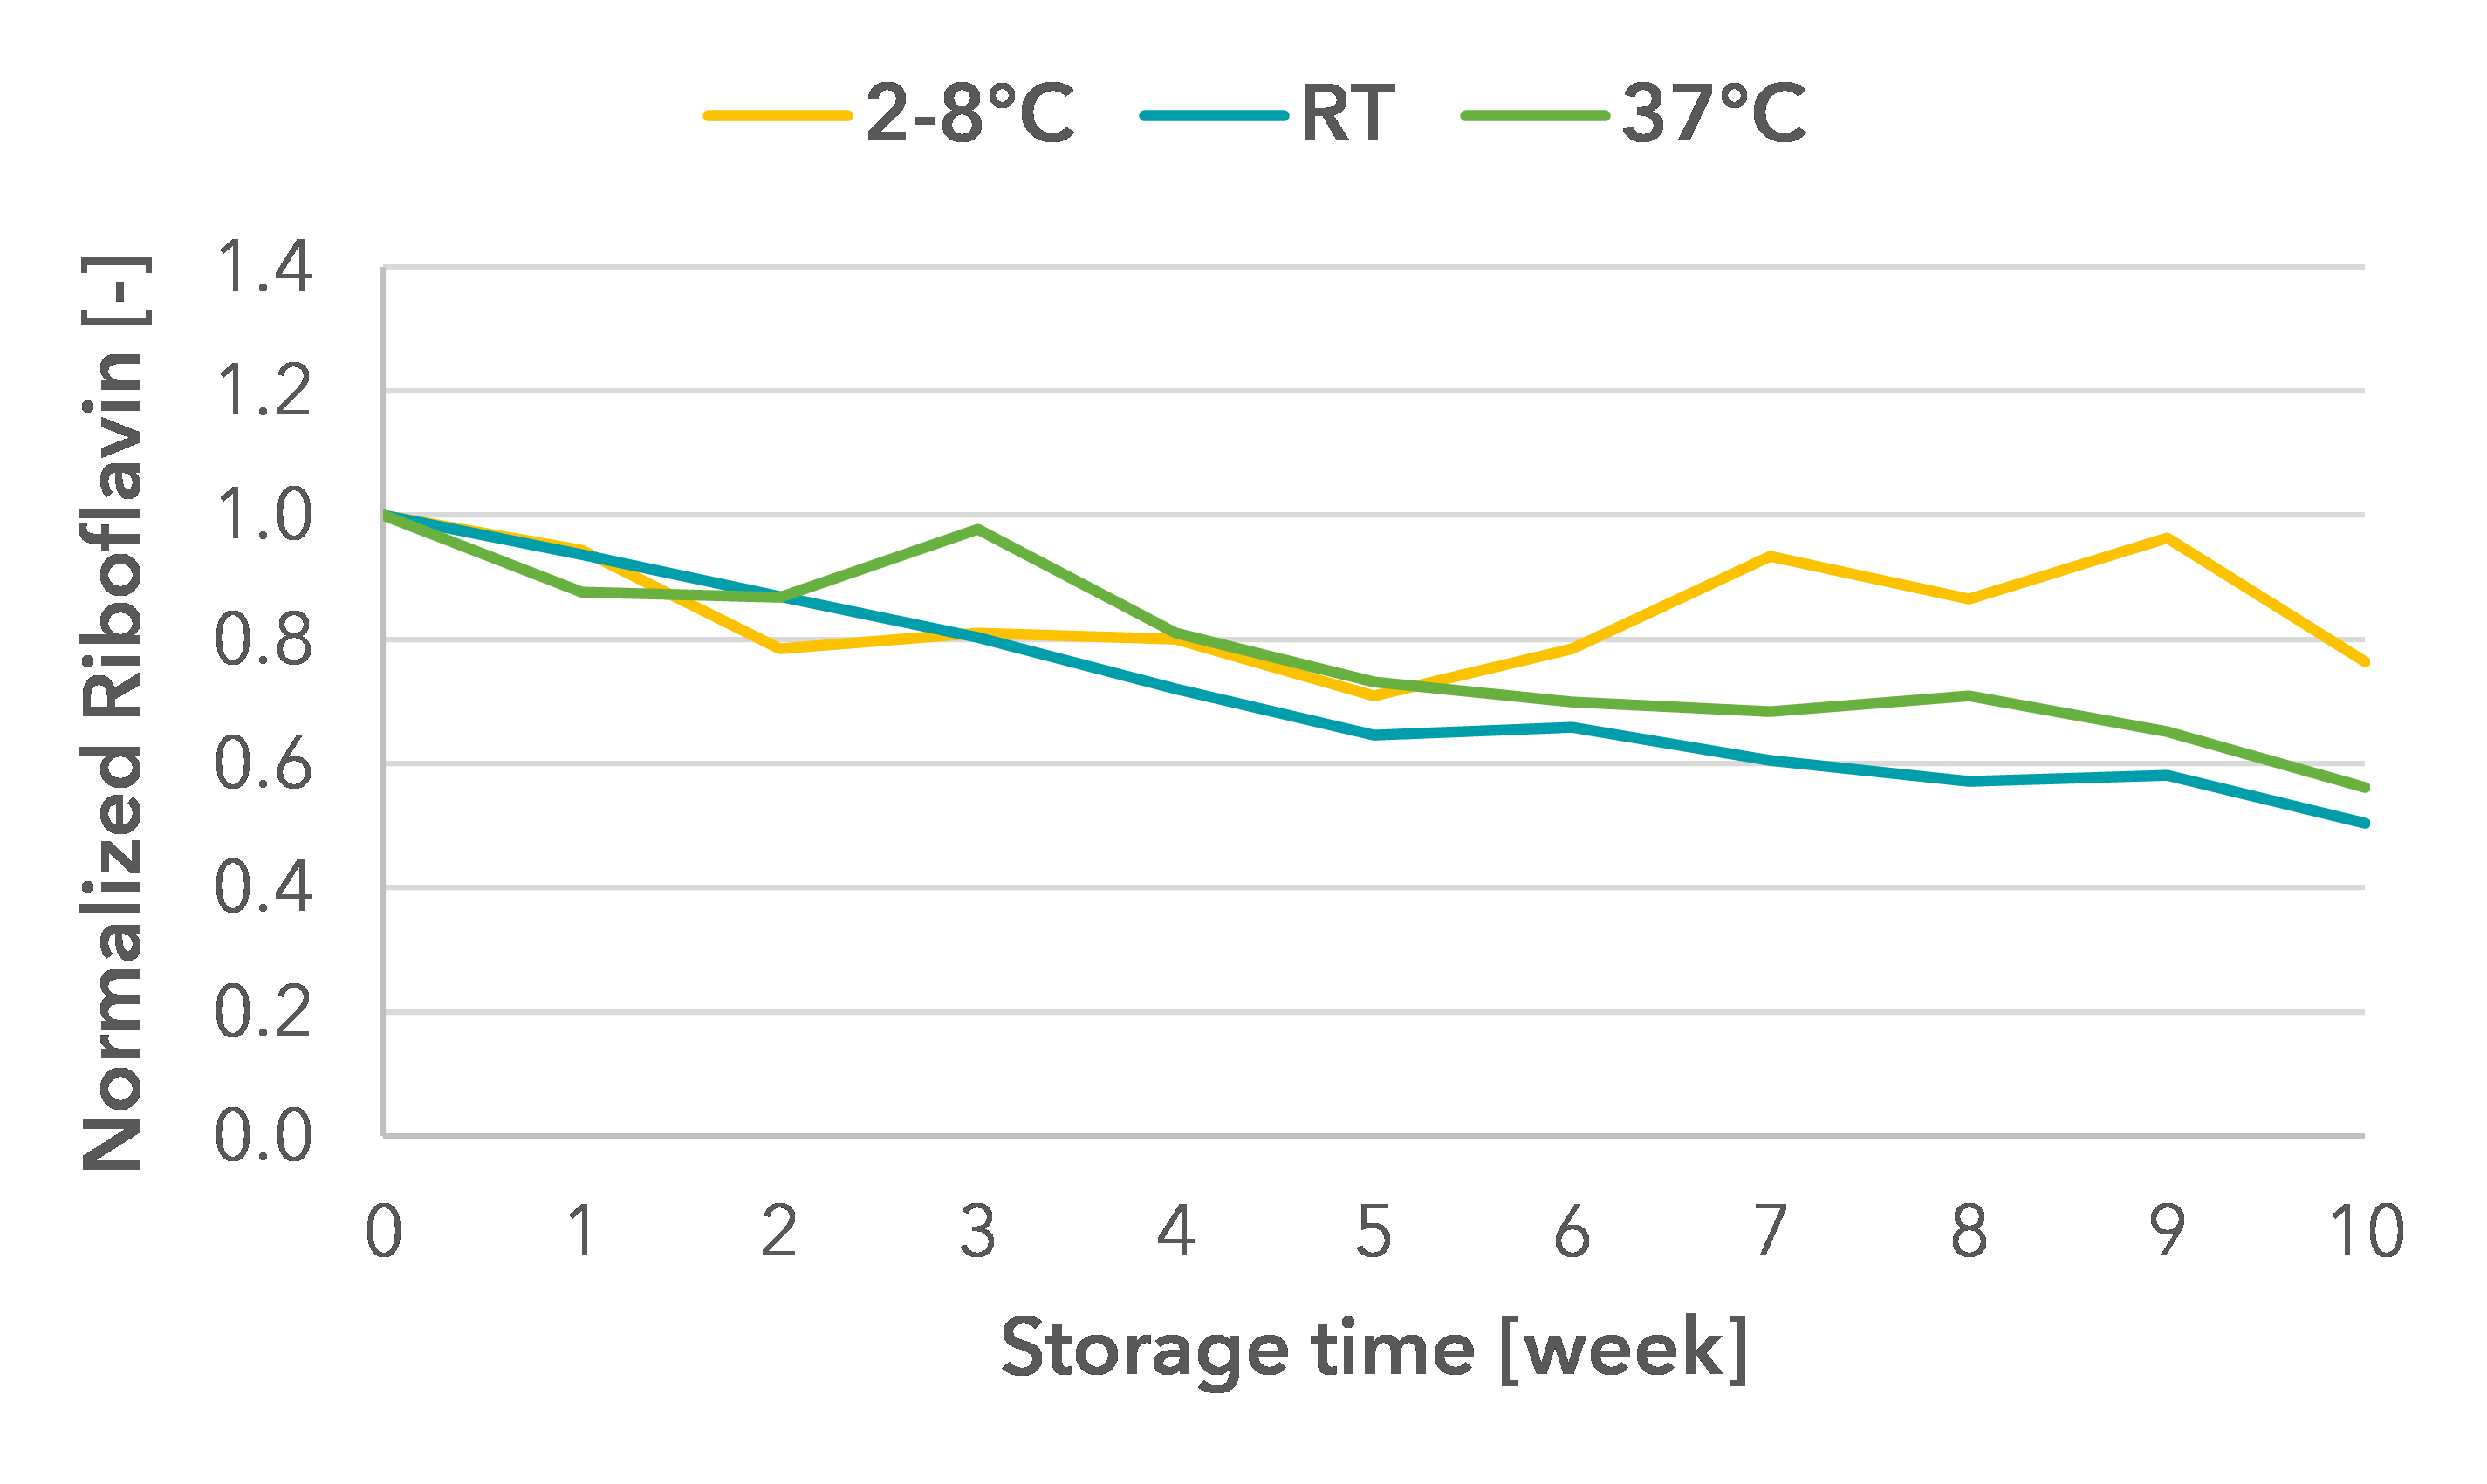 Normalized riboflavin data over 10 weeks at temporarily deviating storage conditions (RT = room temperature or 37°C) compared to the recommended storage at 2-8°C, as an example for a known less stable vitamin.